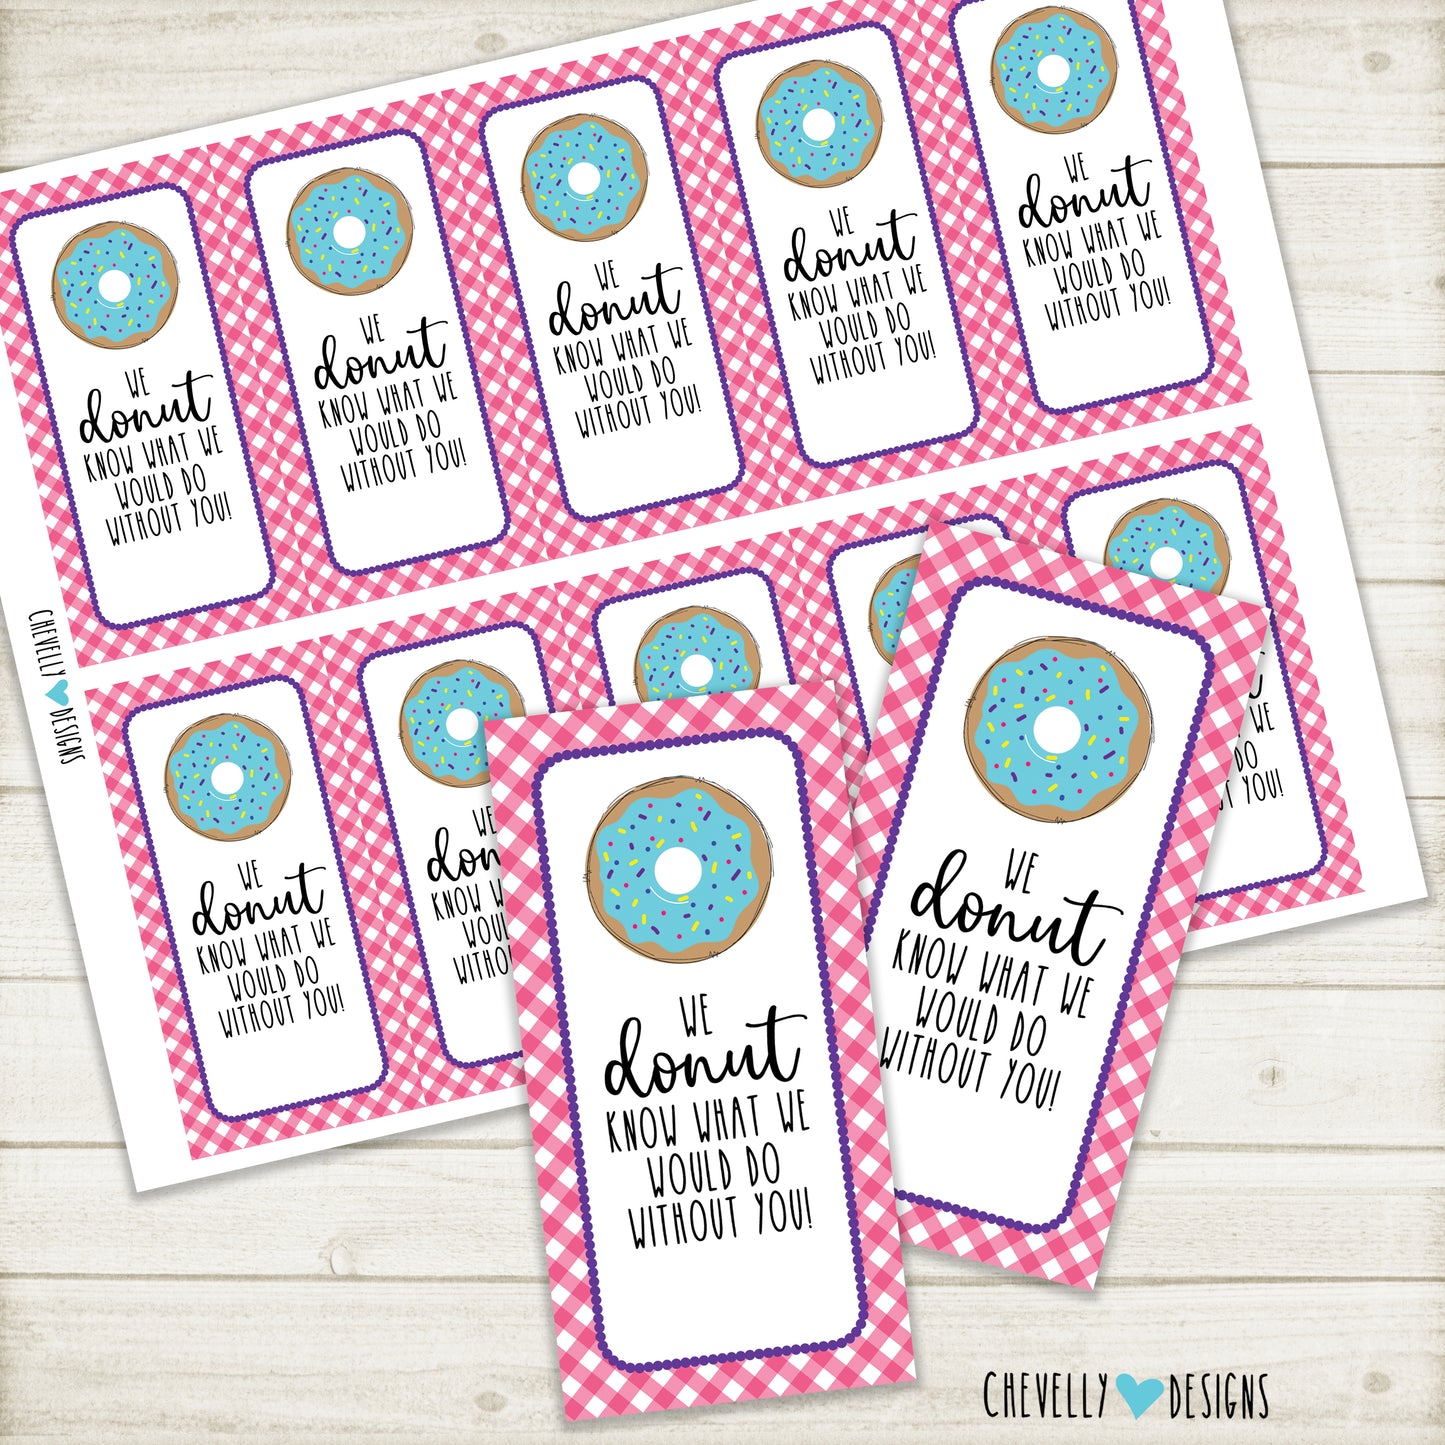 Printable Donut Gift Tags - We DONUT know what we would do without you - Instant Digital Download